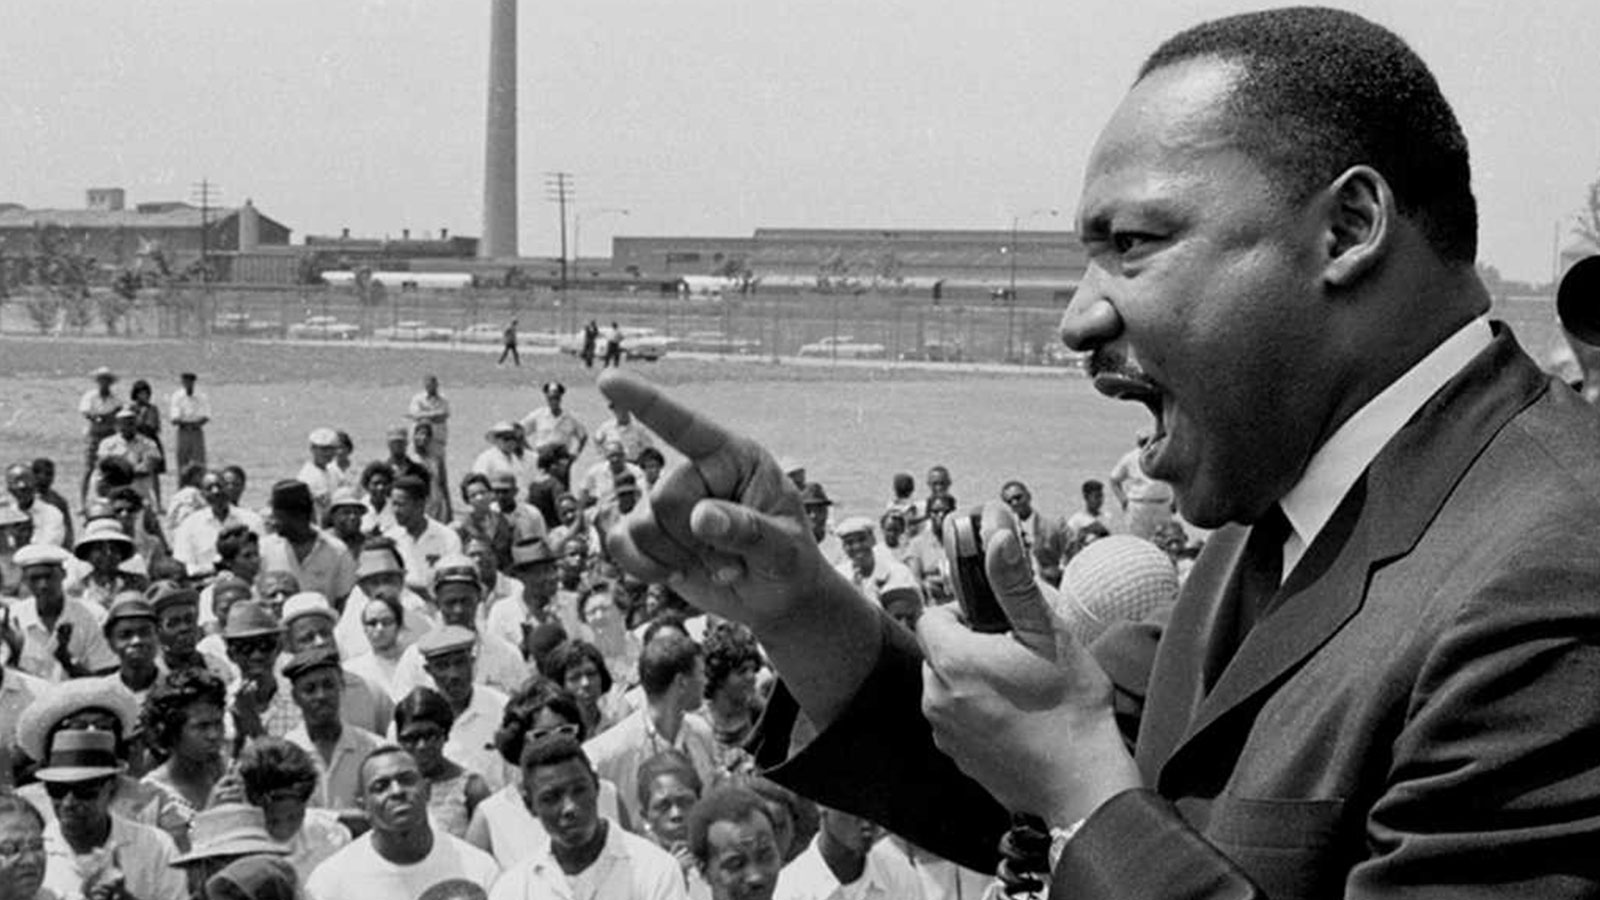 Reckoning with reparations on Dr. Martin Luther King Jr. Day